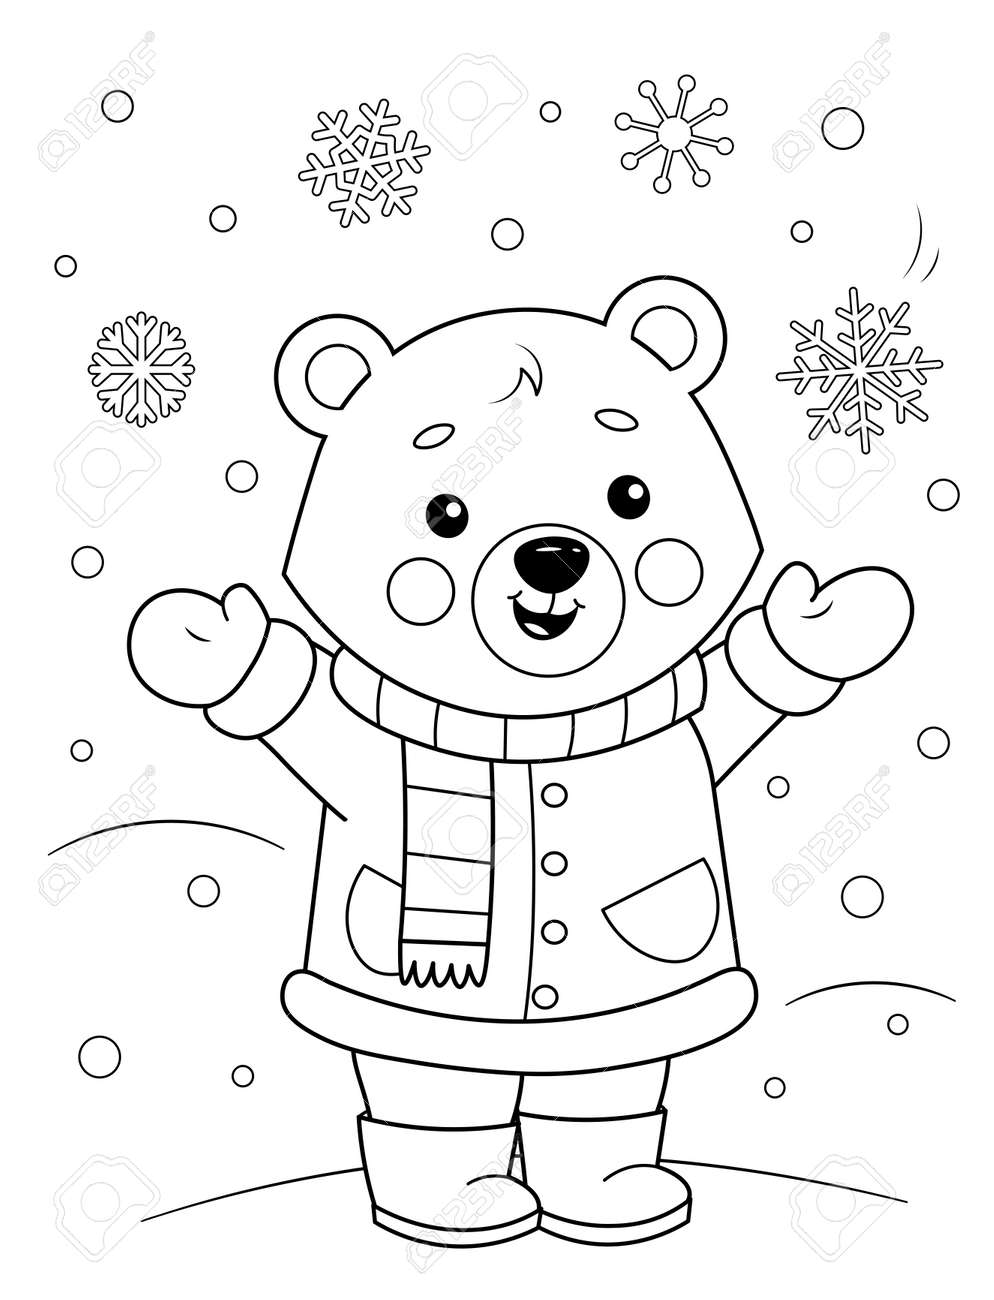 Coloring page of a cute cartoon teddy bear in winter clothes enjoying the snow coloring book for kids royalty free svg cliparts vectors and stock illustration image